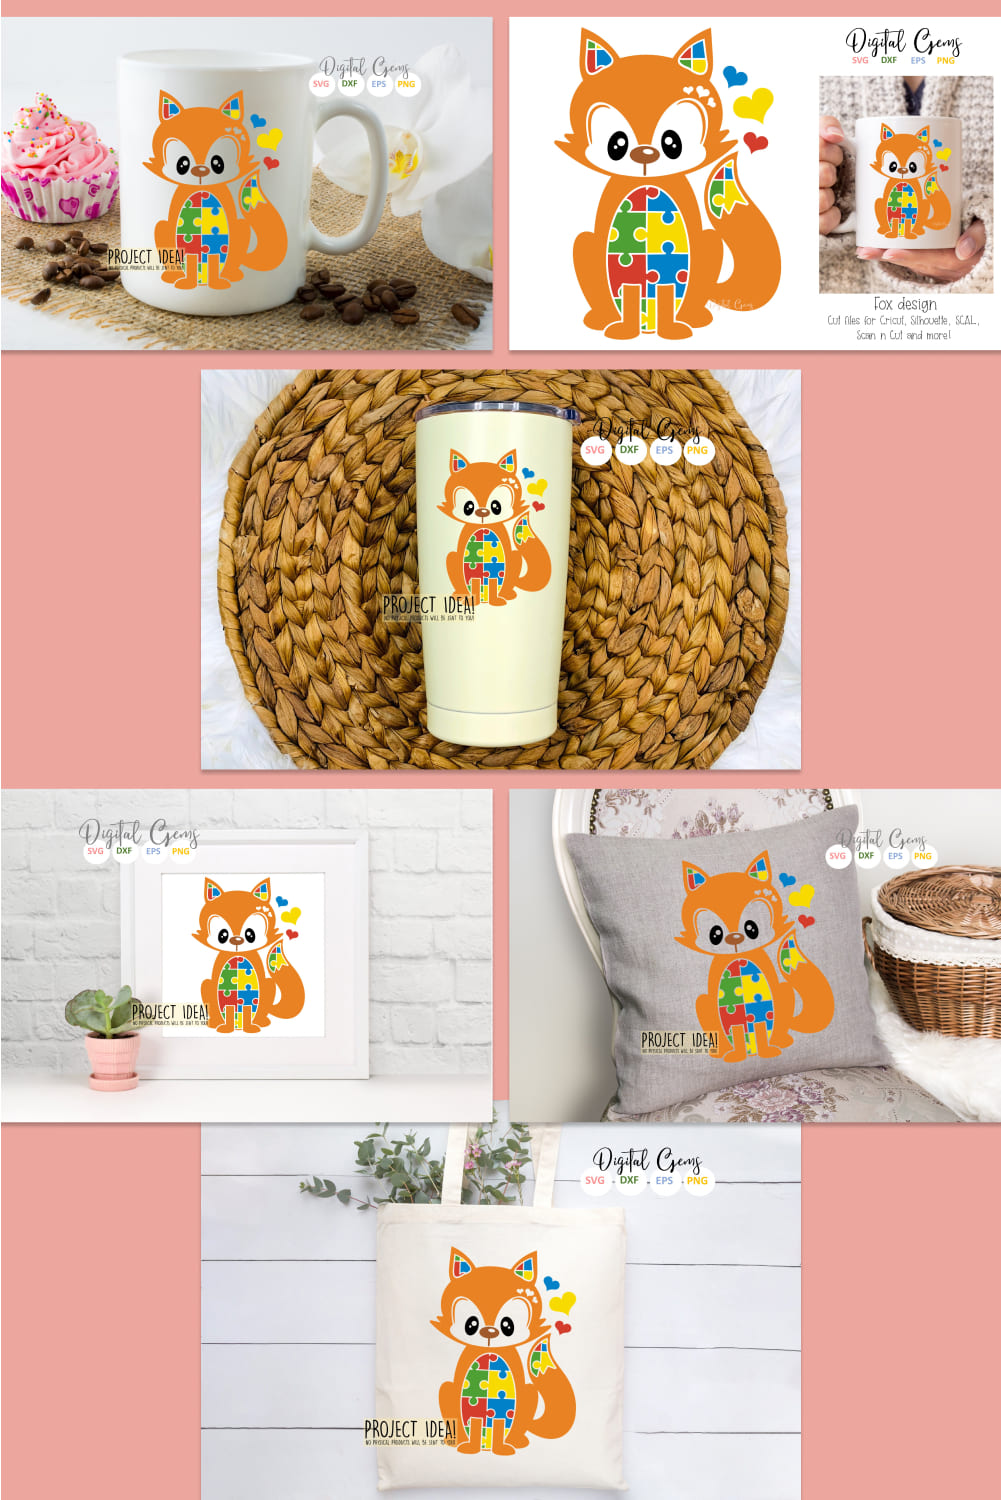 This listing is for a Fox design as shown in the images.